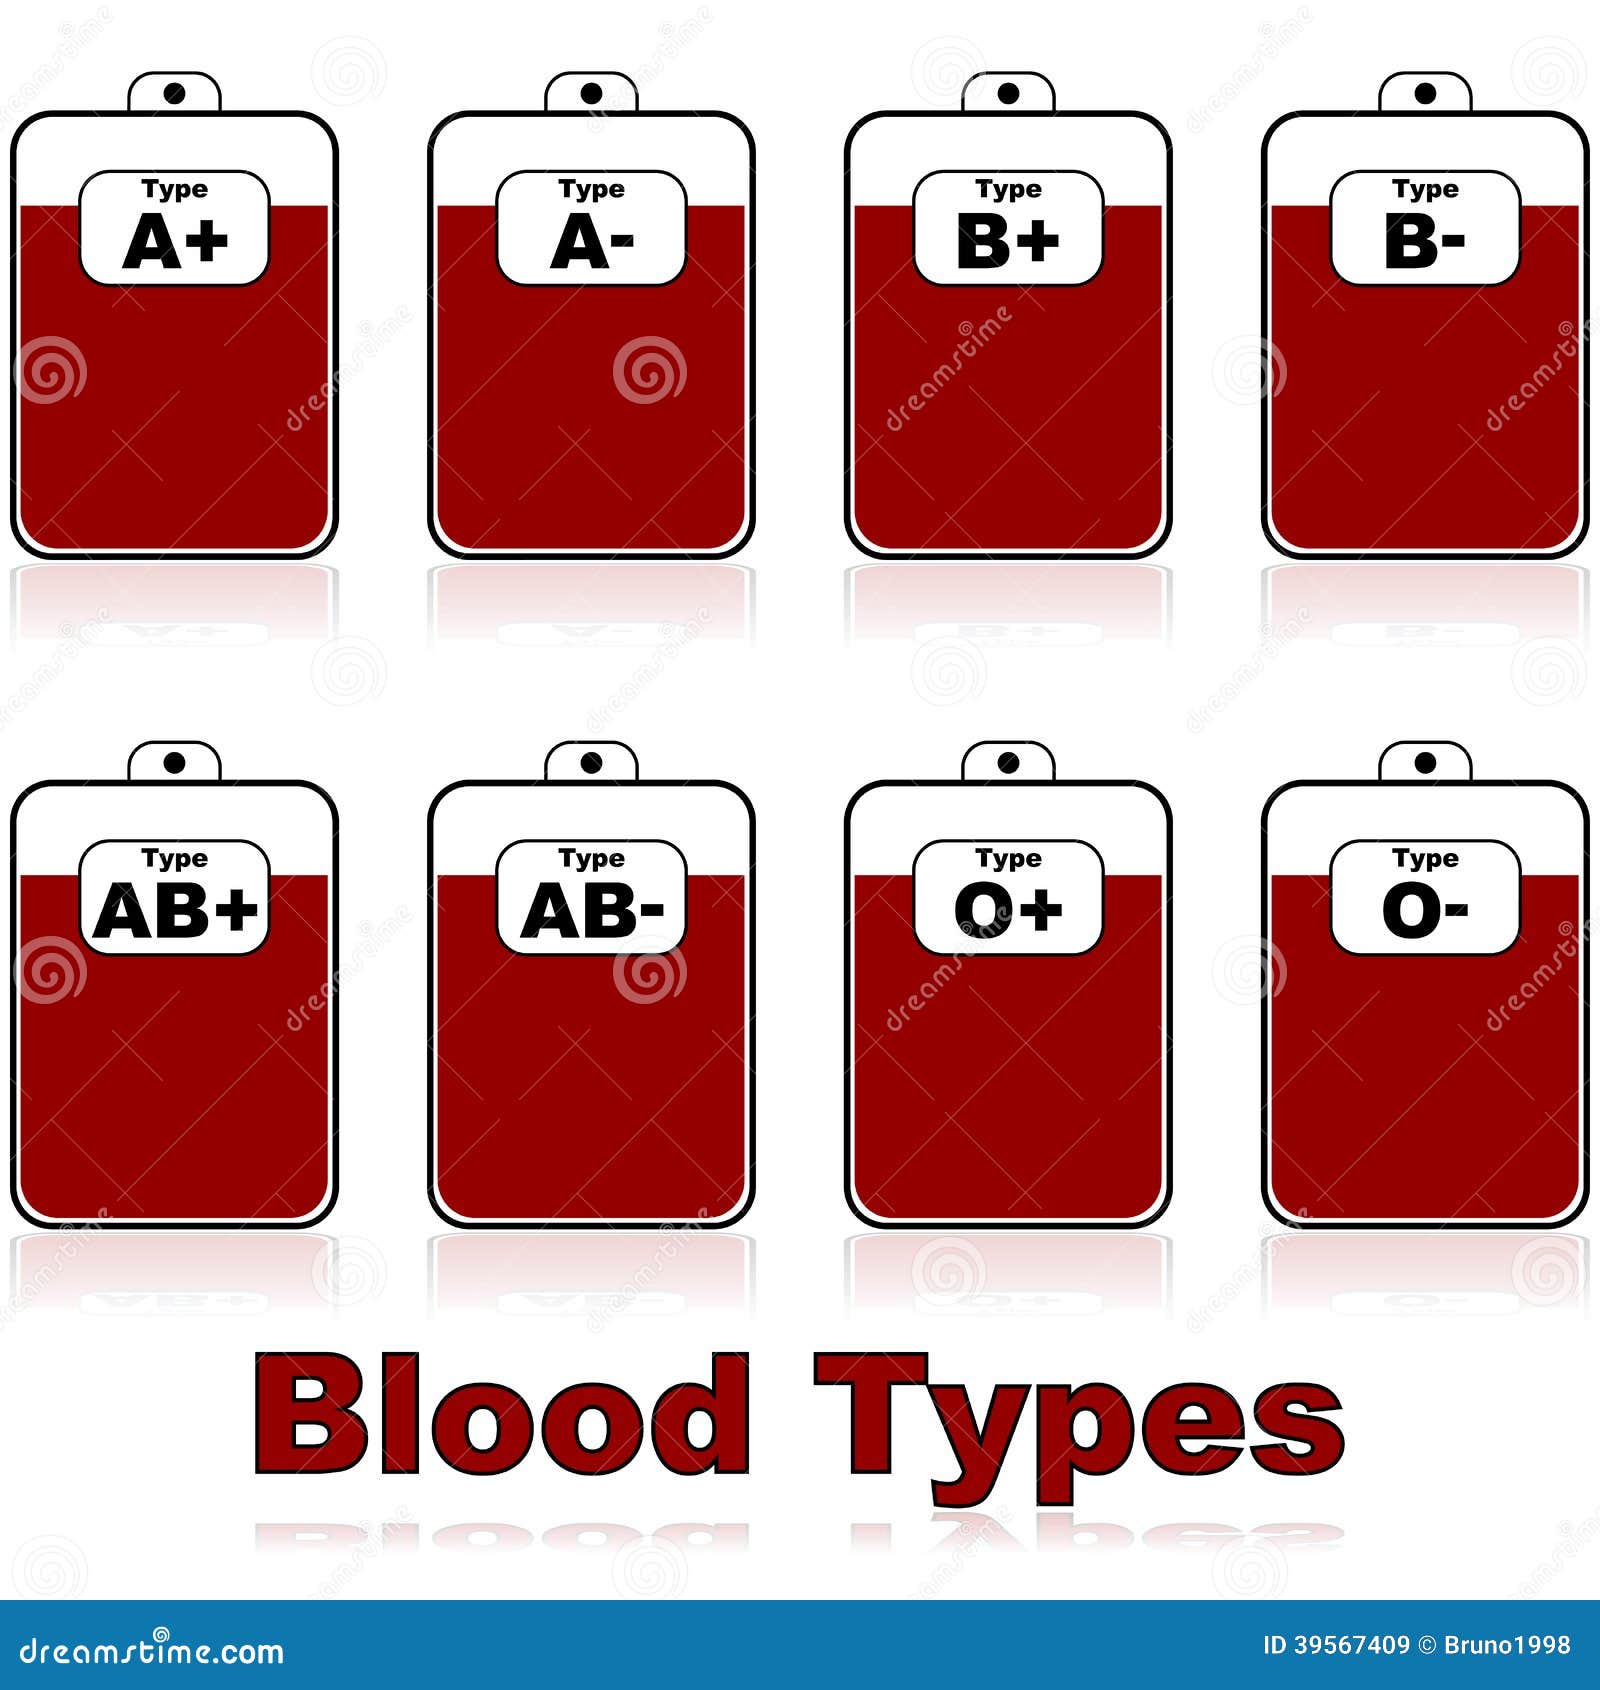 blood type clipart - photo #11